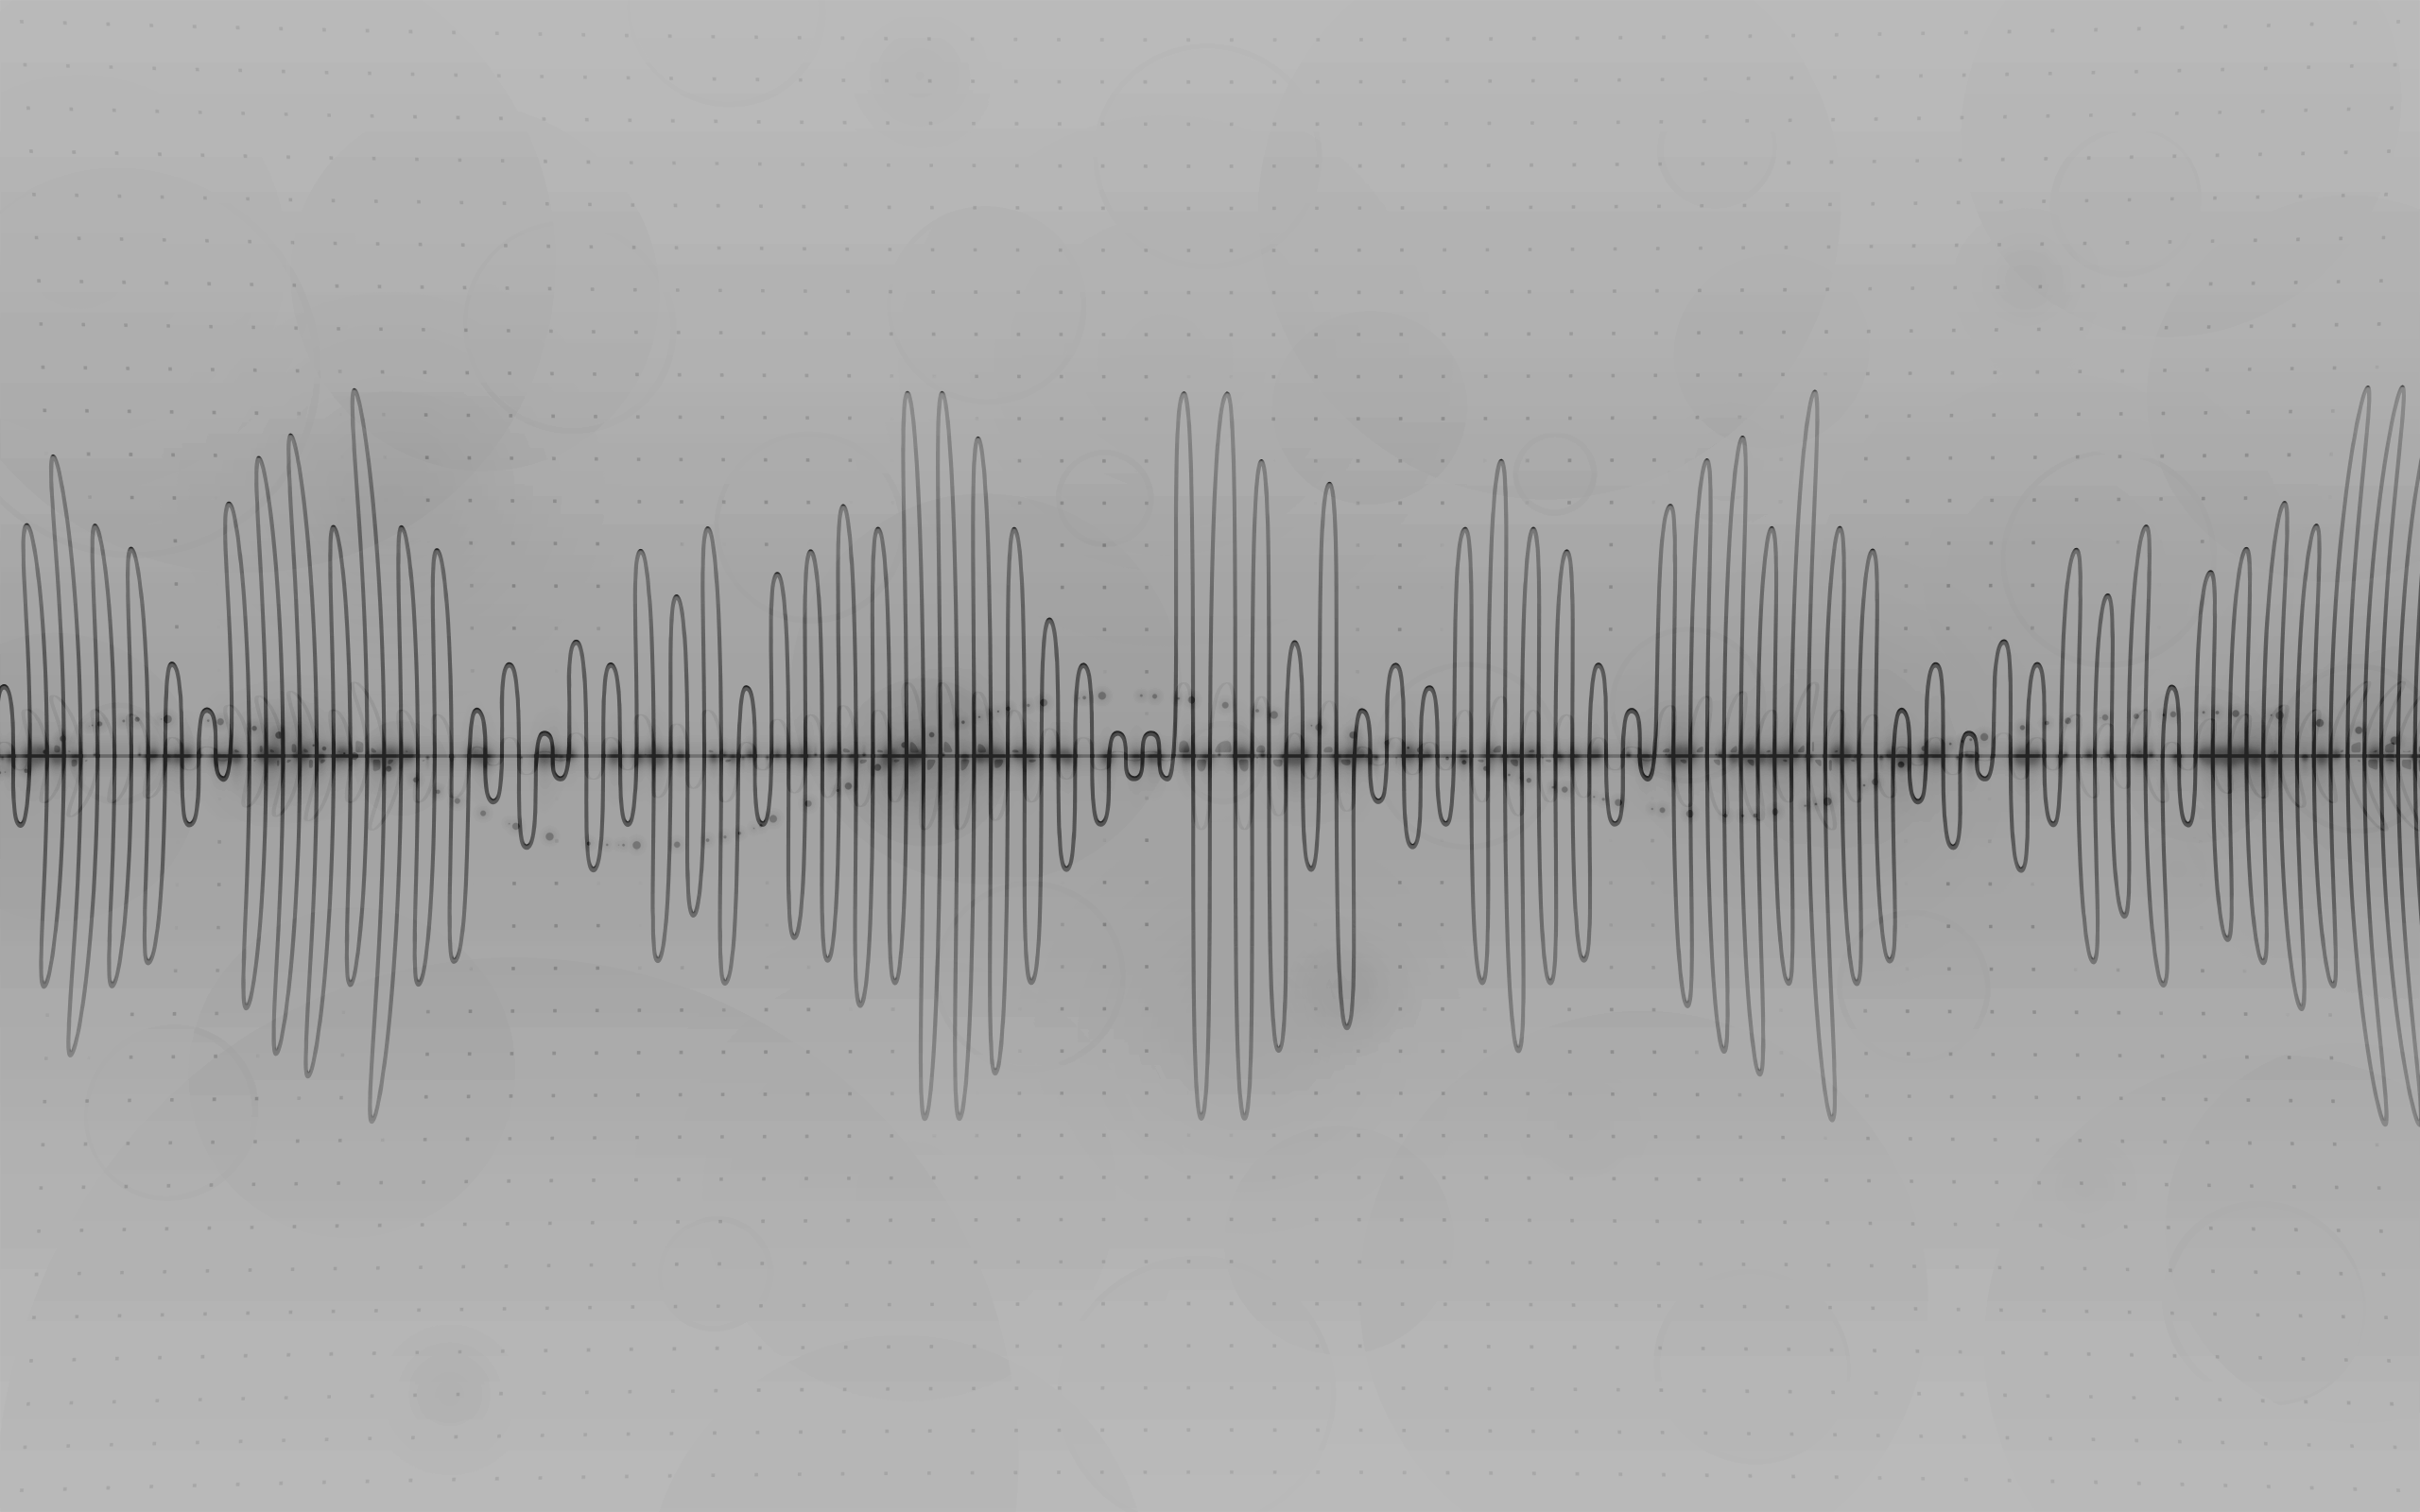 Wallpaper For > Sound Waves Wallpaper White. Wave wallpaper, Waves wallpaper, Sound waves